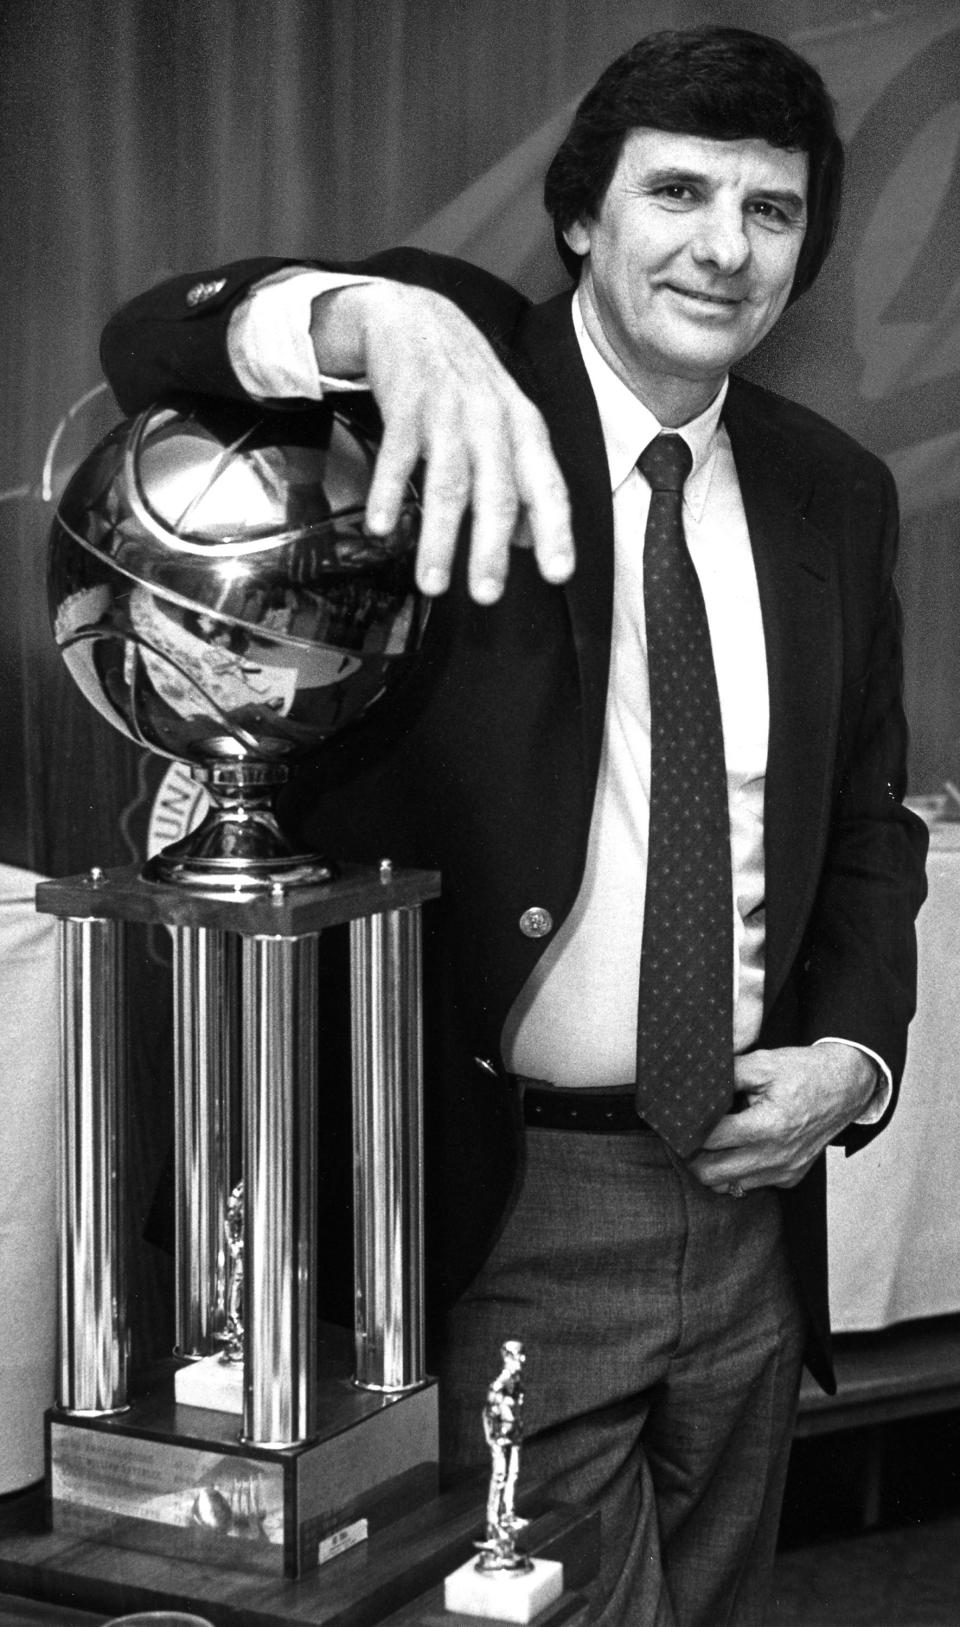 The late Jack Greynolds Sr. become accustomed to receiving coach of the year awards at the helm of the Barberton High School boys basketball program. Greynolds is pictured with a trophy in 1984.